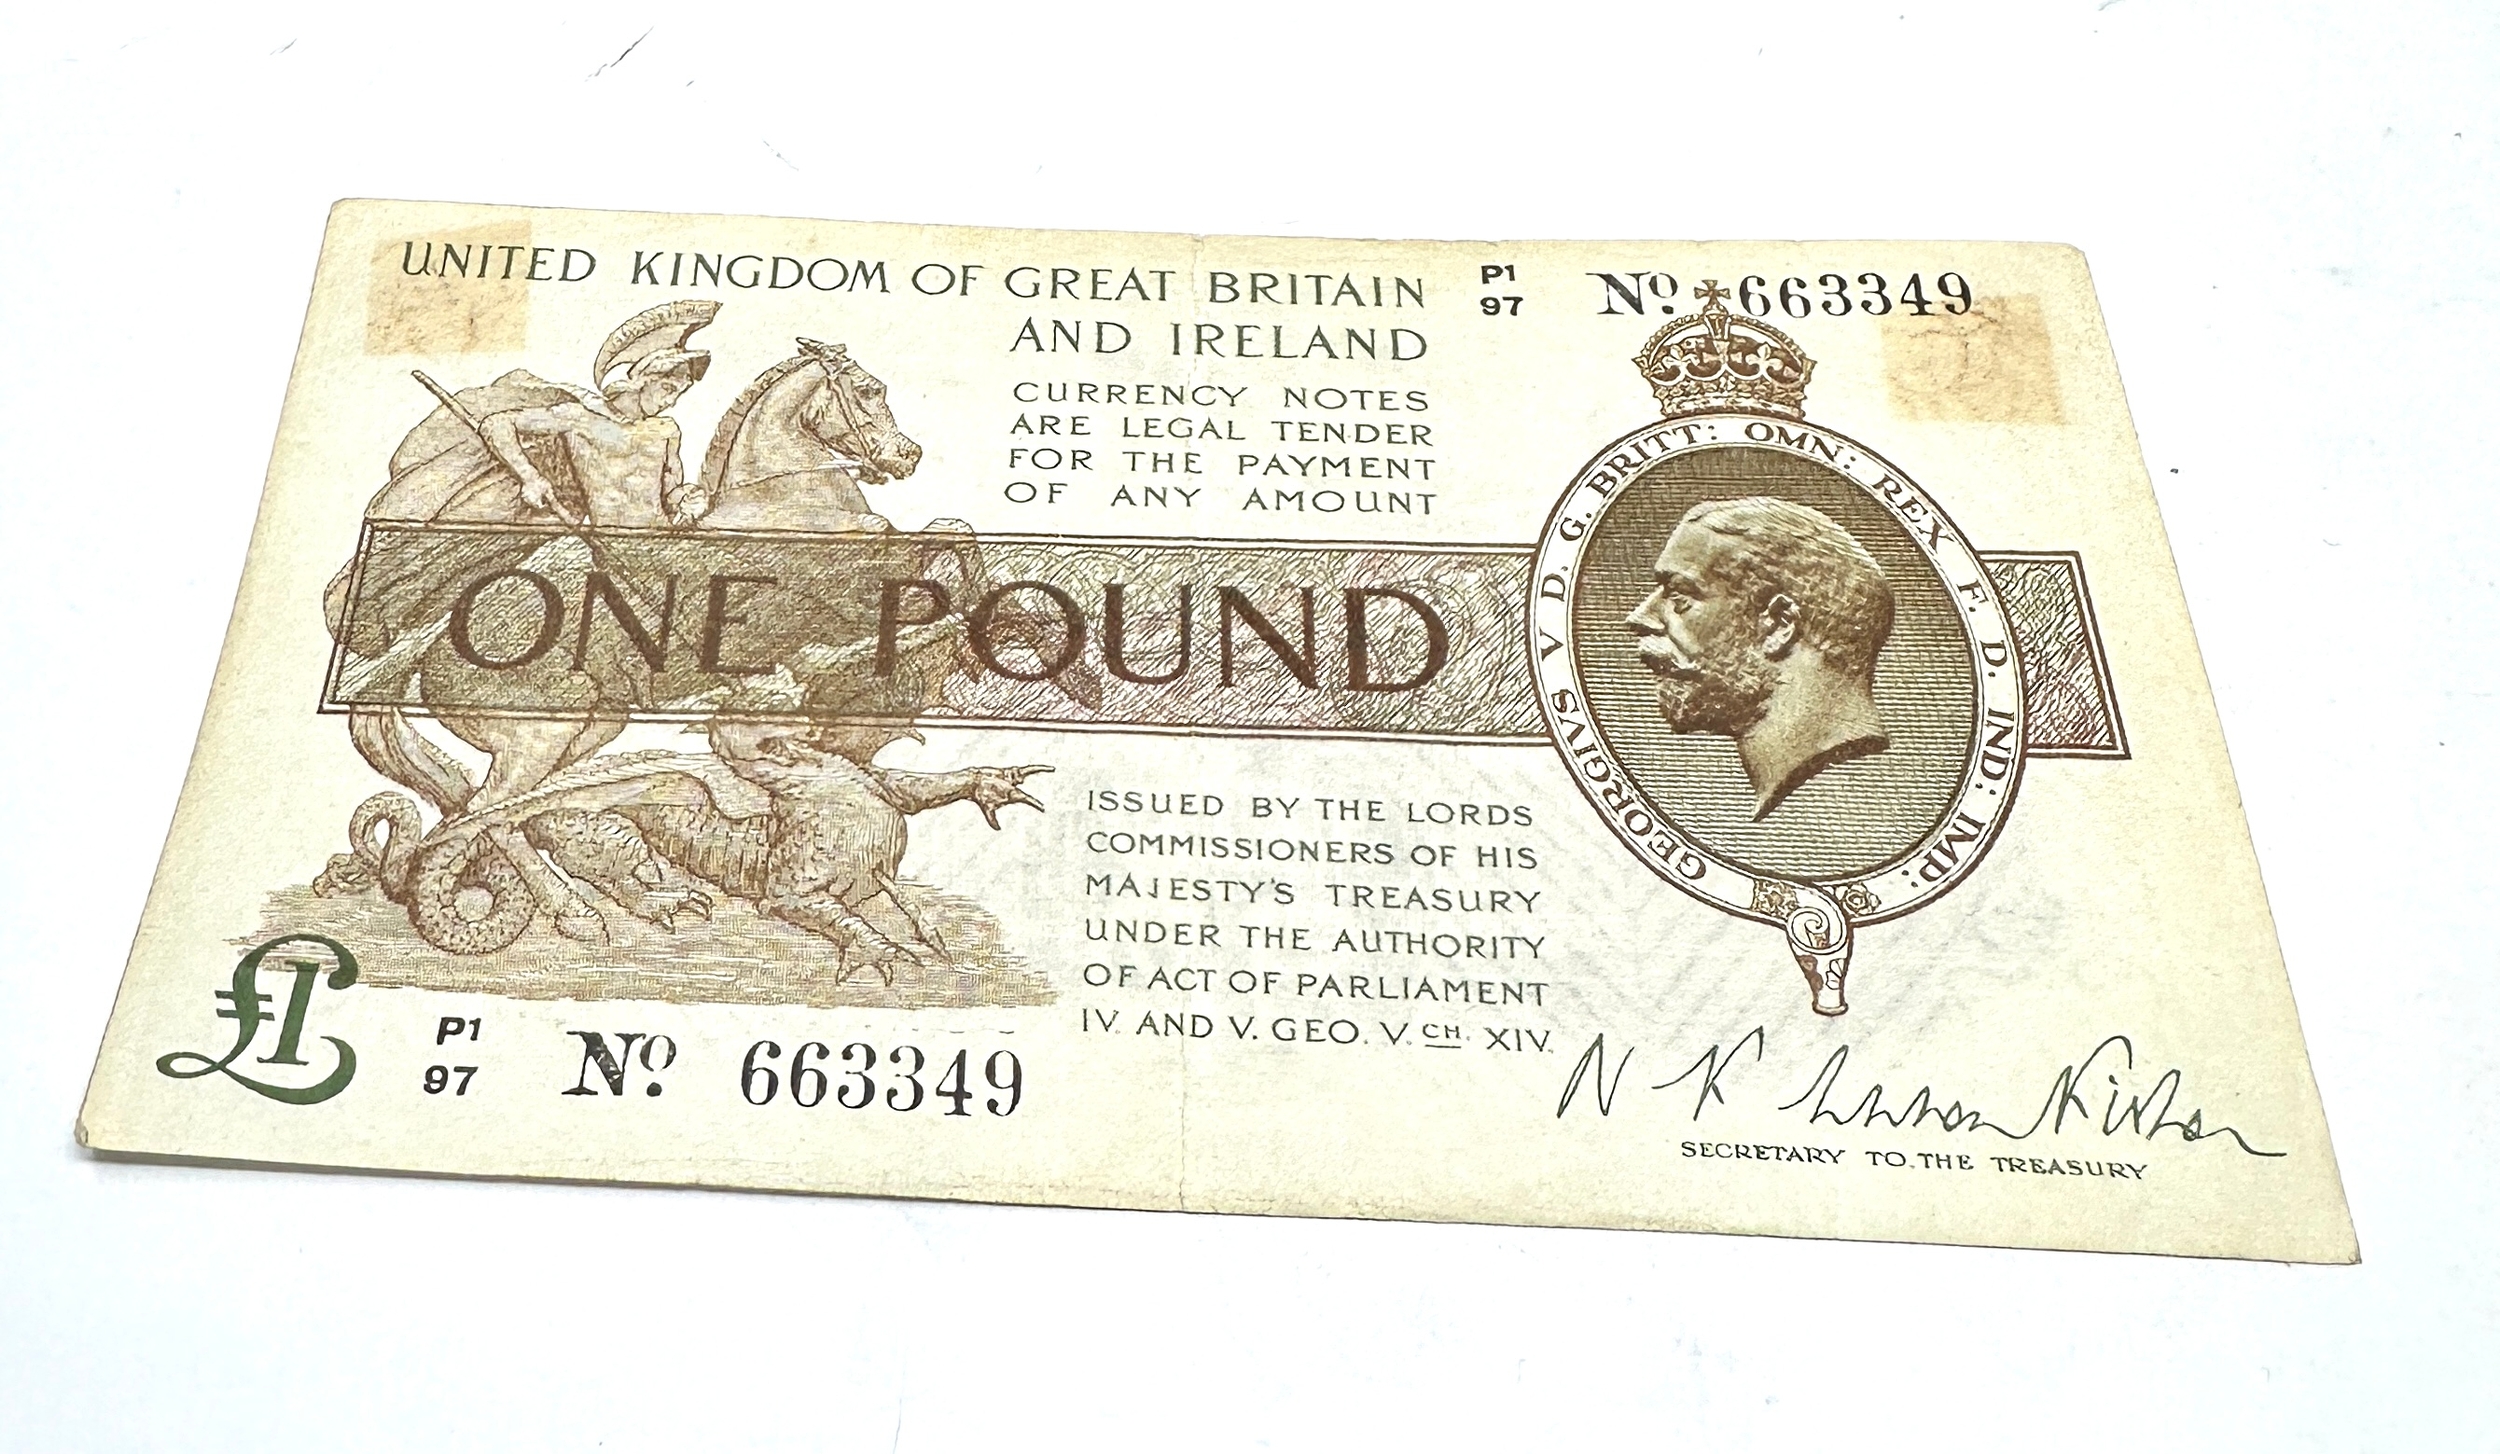 United Kingdom of Great Britain and Ireland one pound